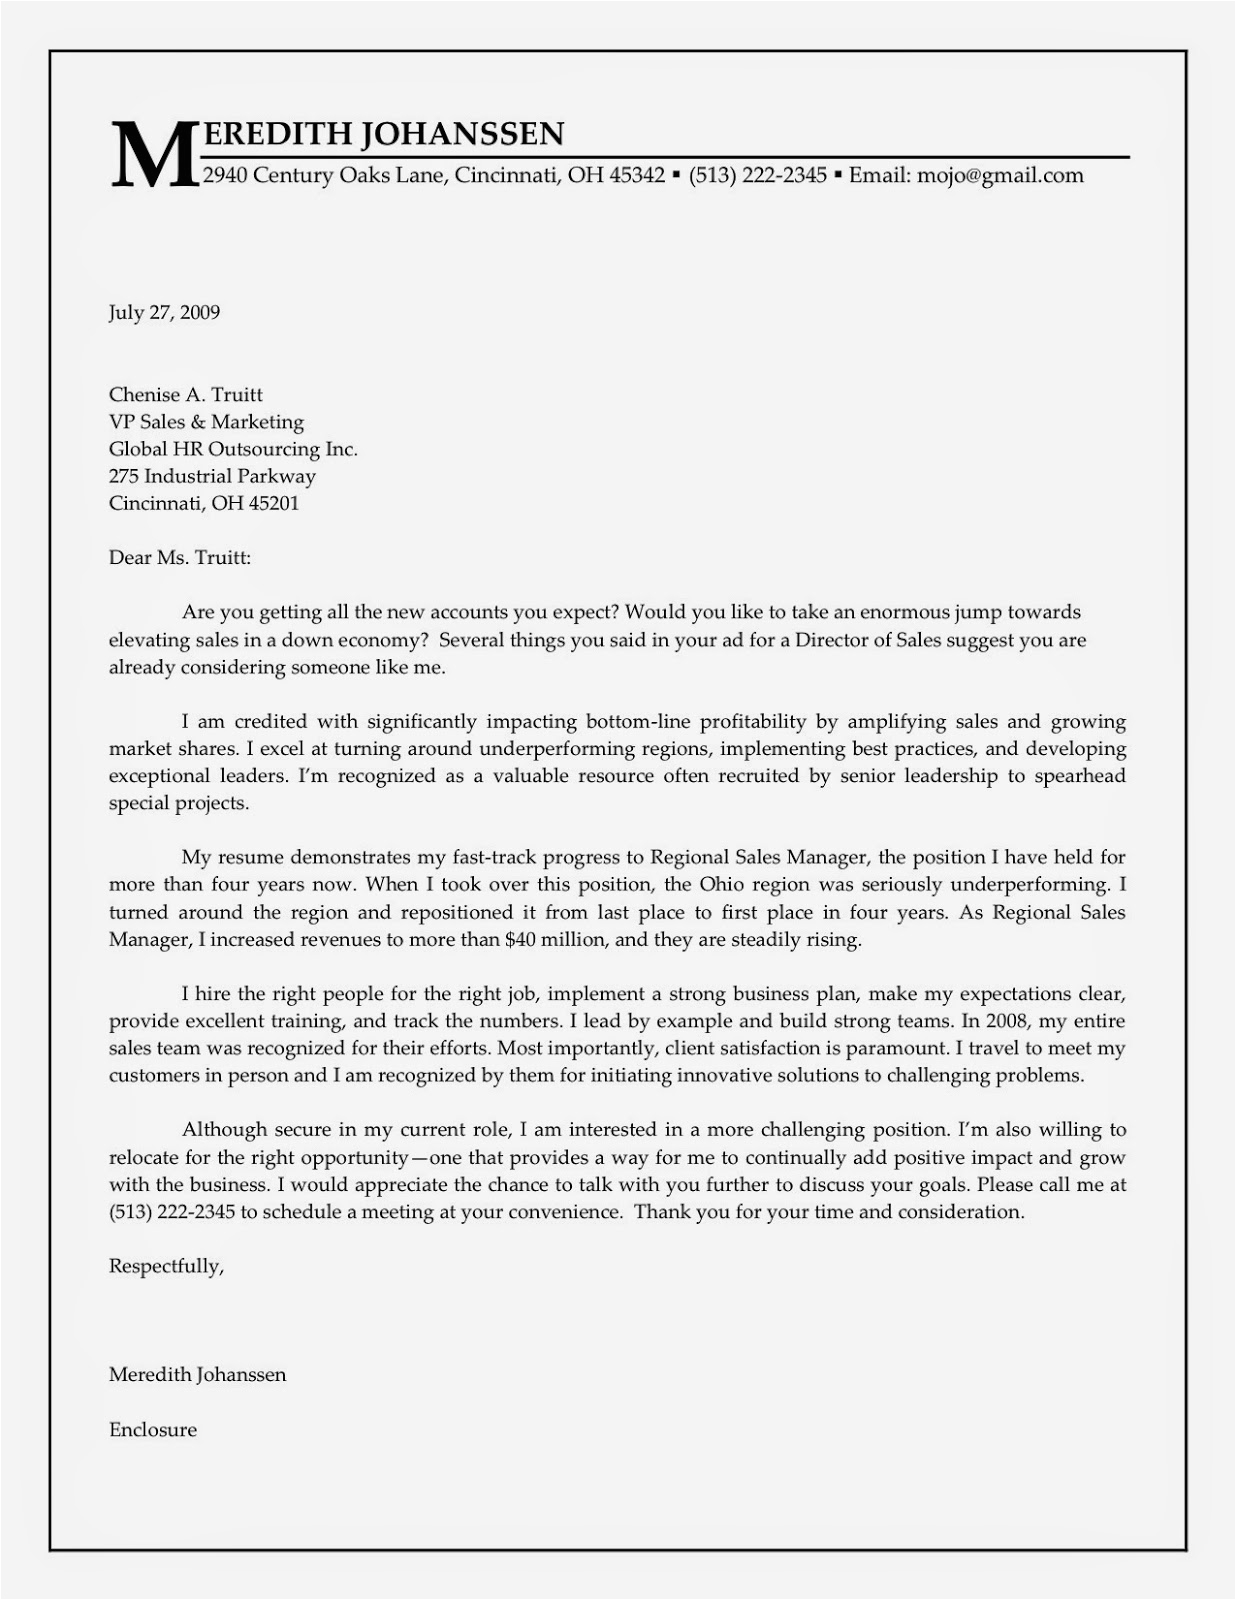 Free Sample Cover Letters for Resumes Examples Job Cover Letter Sample for Resume